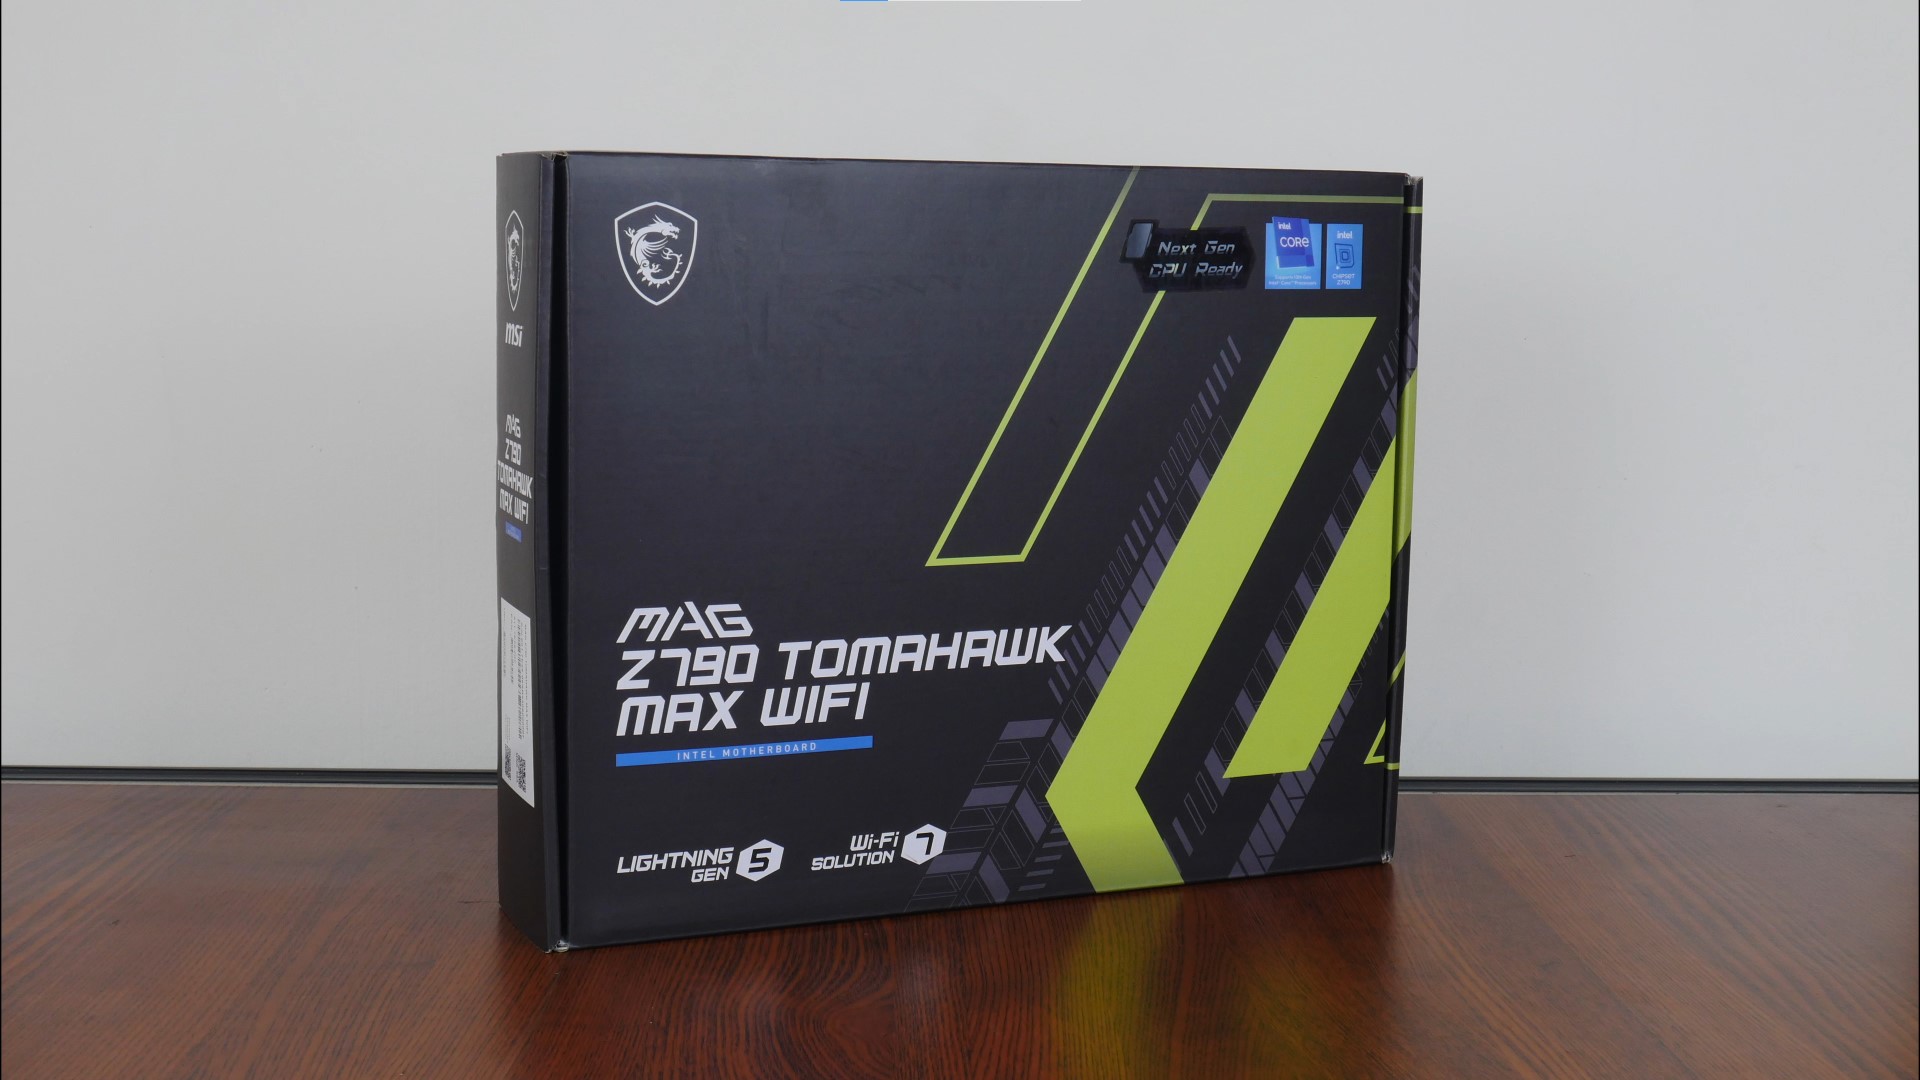 MSI MAG Z790 TOMAHAWK MAX WIFI Packaging (Front)